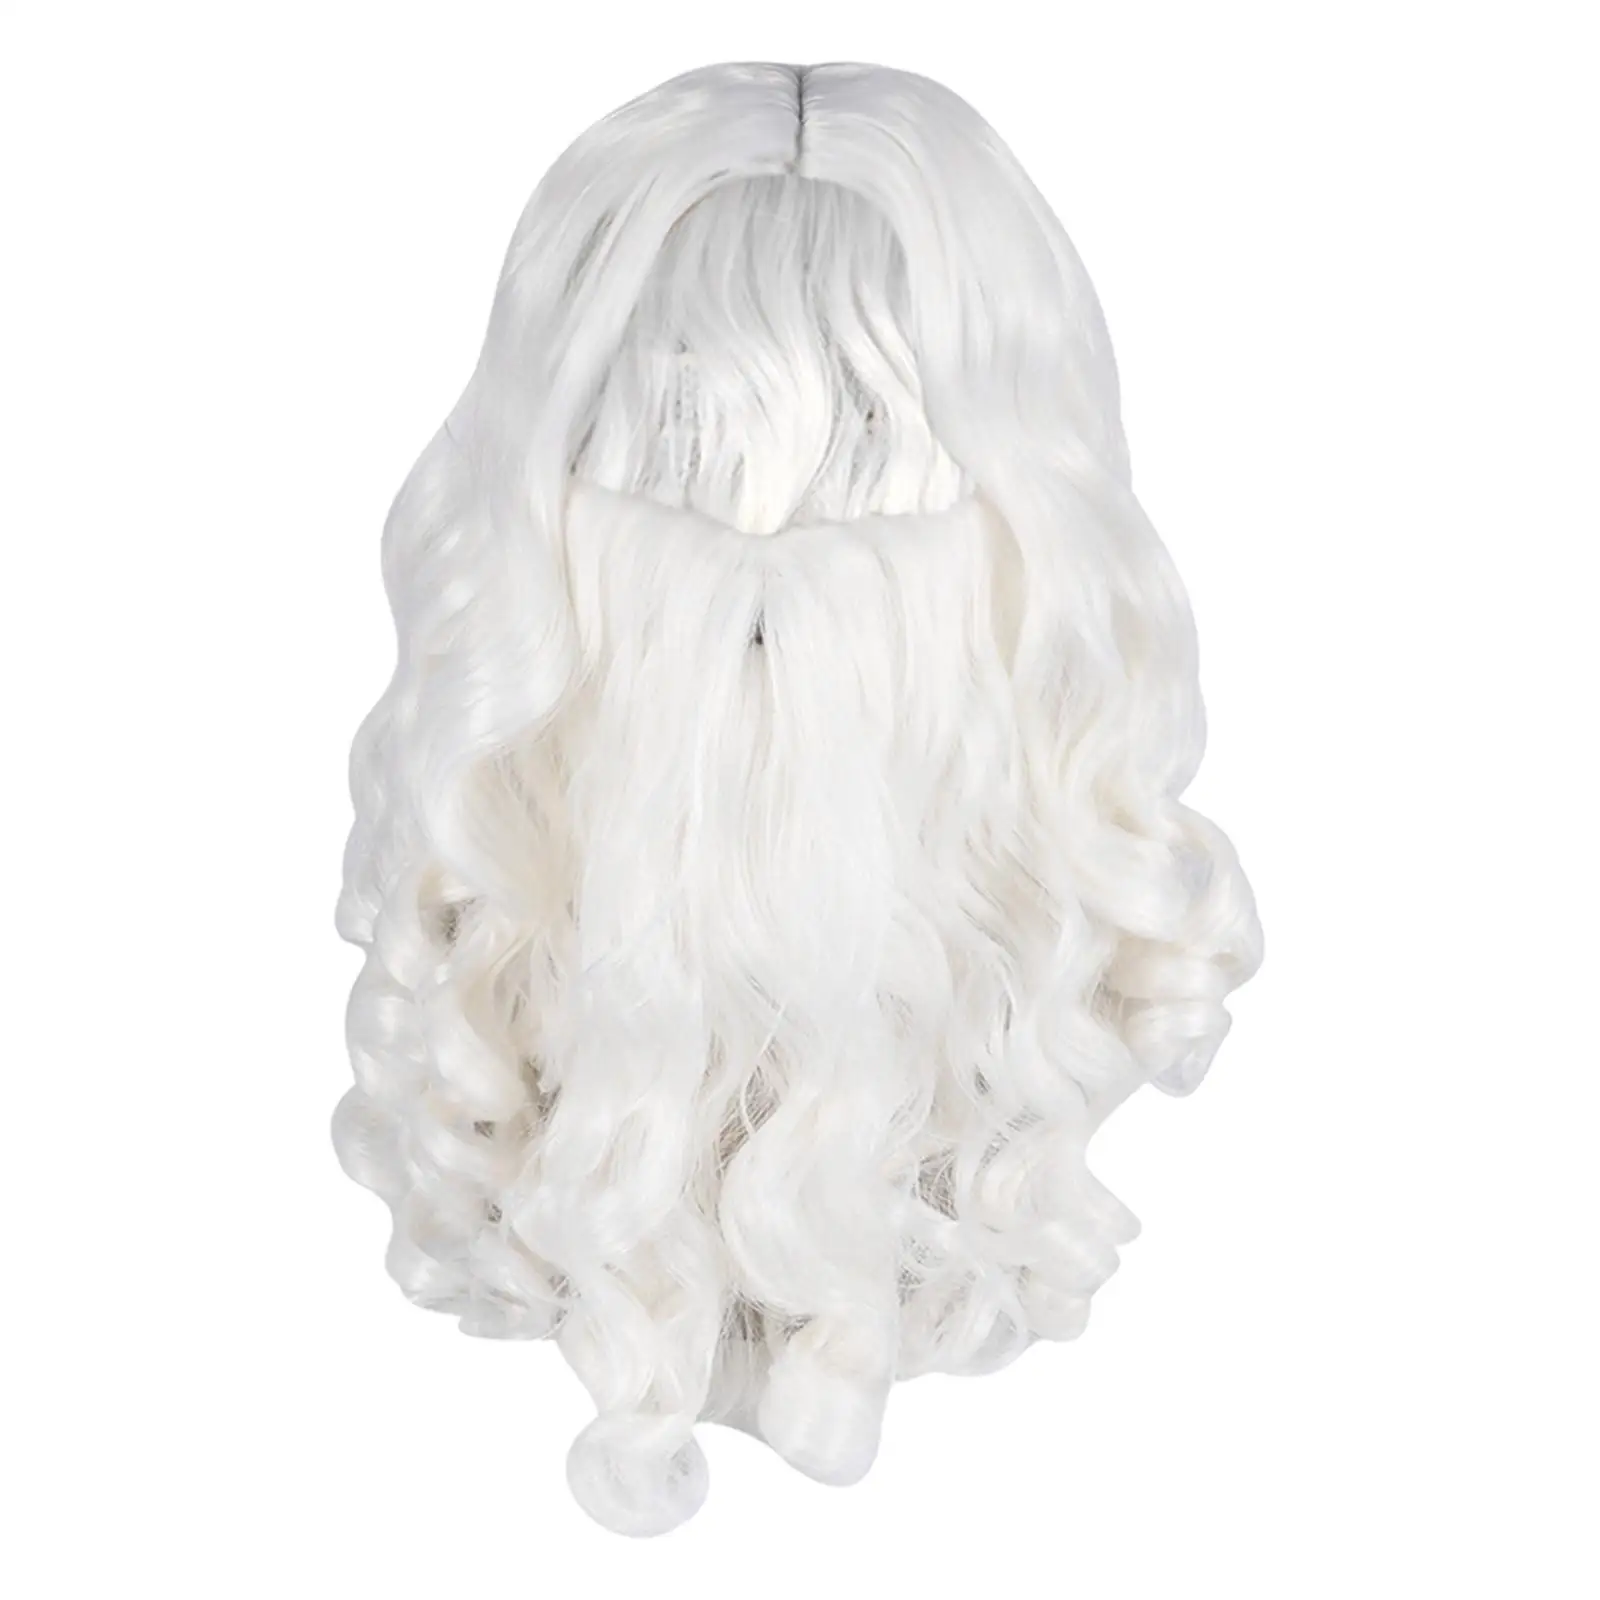 Santa Hair and Beard Set White Props Santa Claus Costume Accessories for Carnivals Themed Party Holidays Xmas Stage Performance